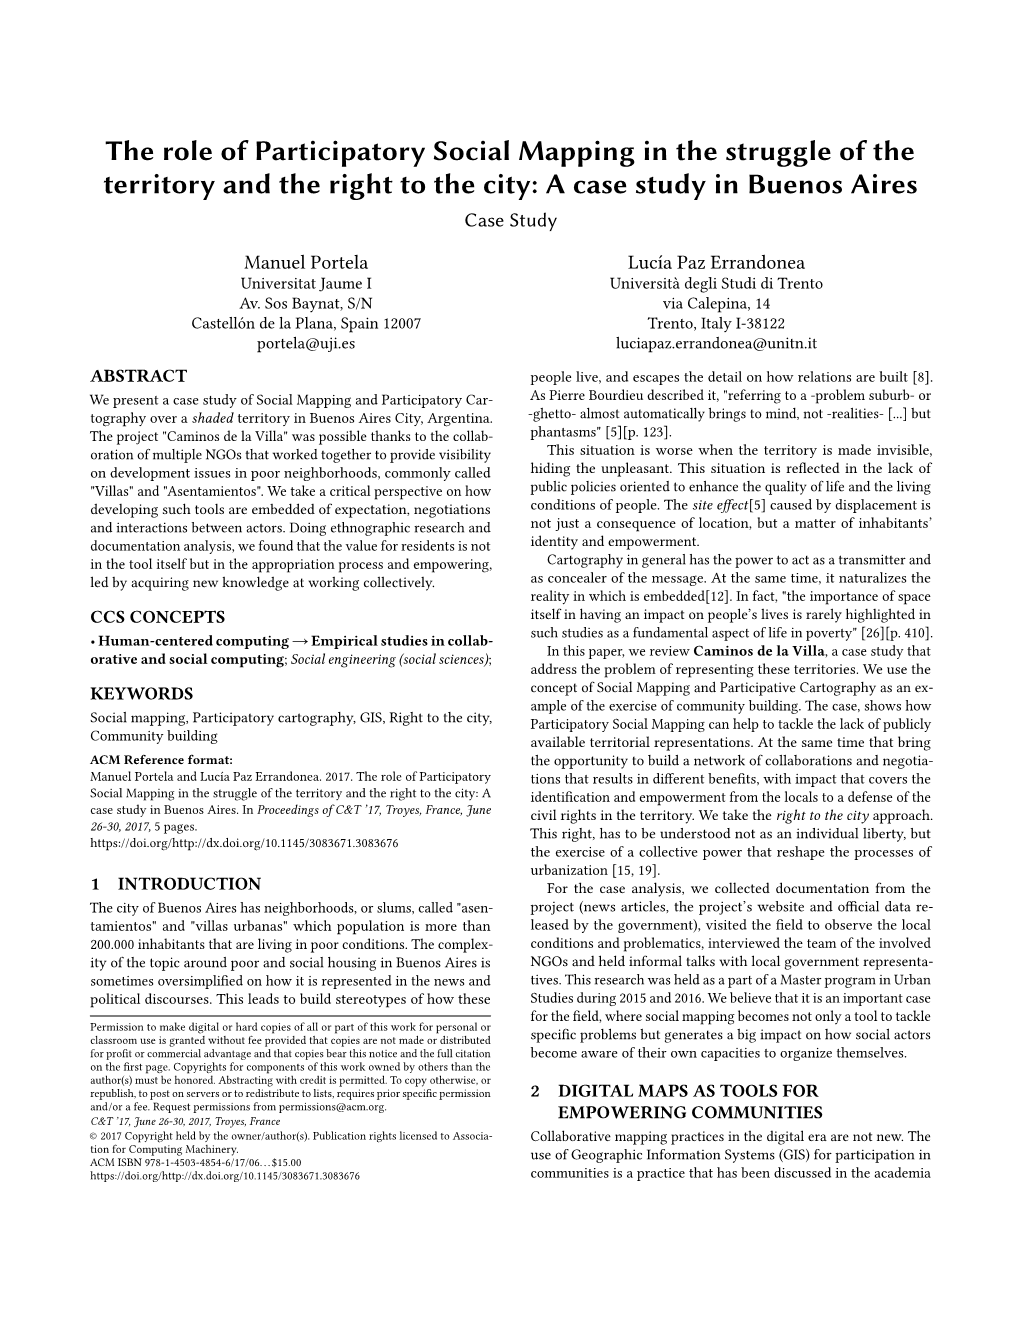 The Role of Participatory Social Mapping in the Struggle of the Territory and the Right to the City: a Case Study in Buenos Aires Case Study